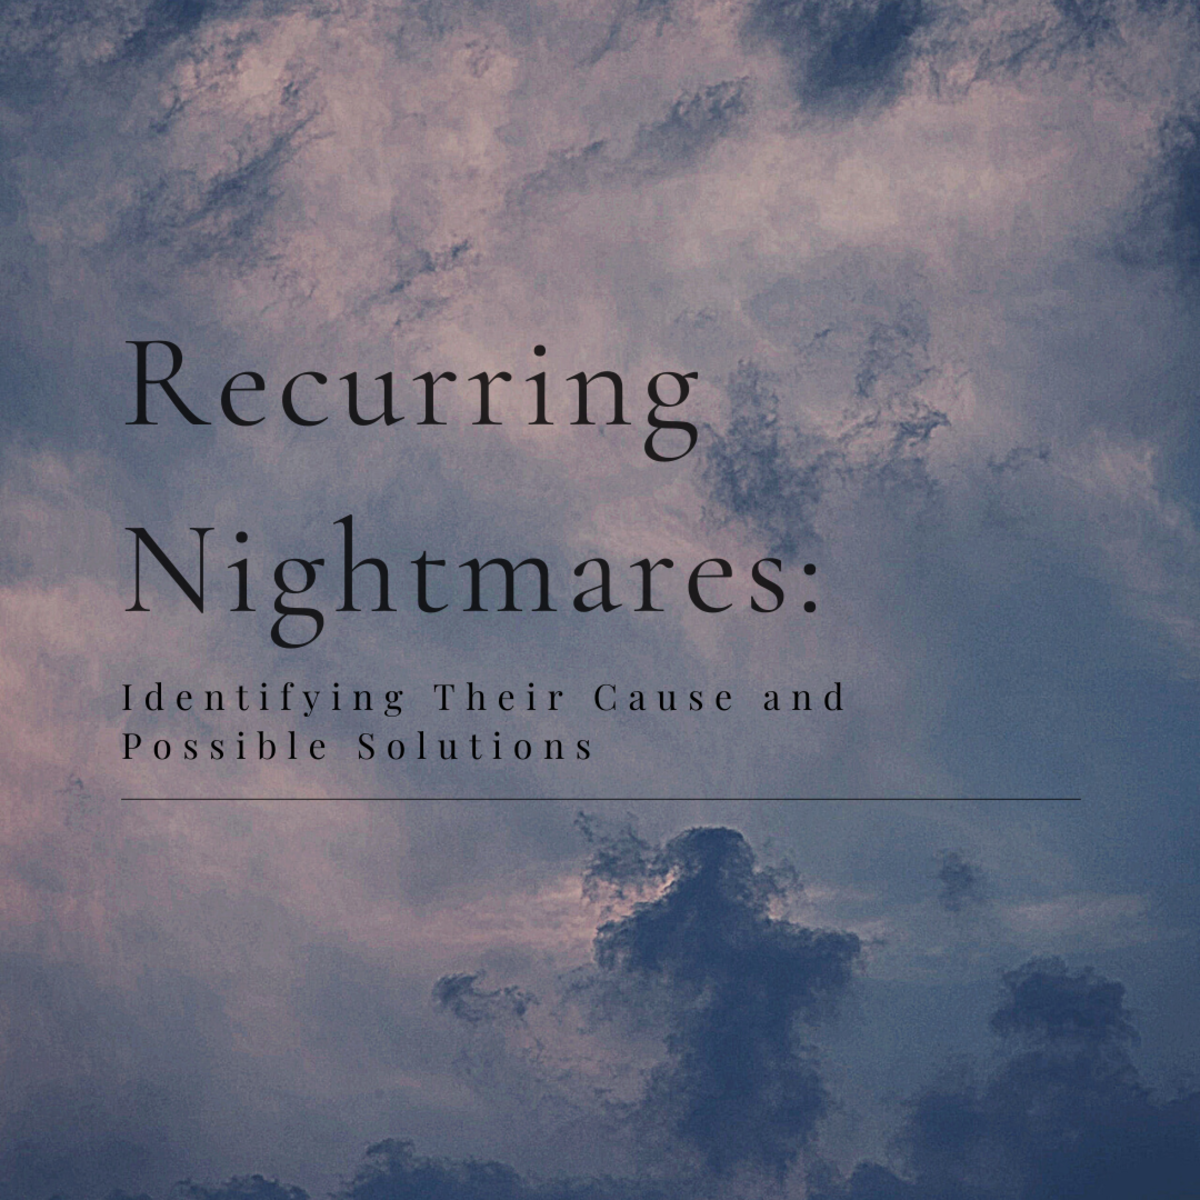 Recurring Nightmares: Possible Causes and Solutions